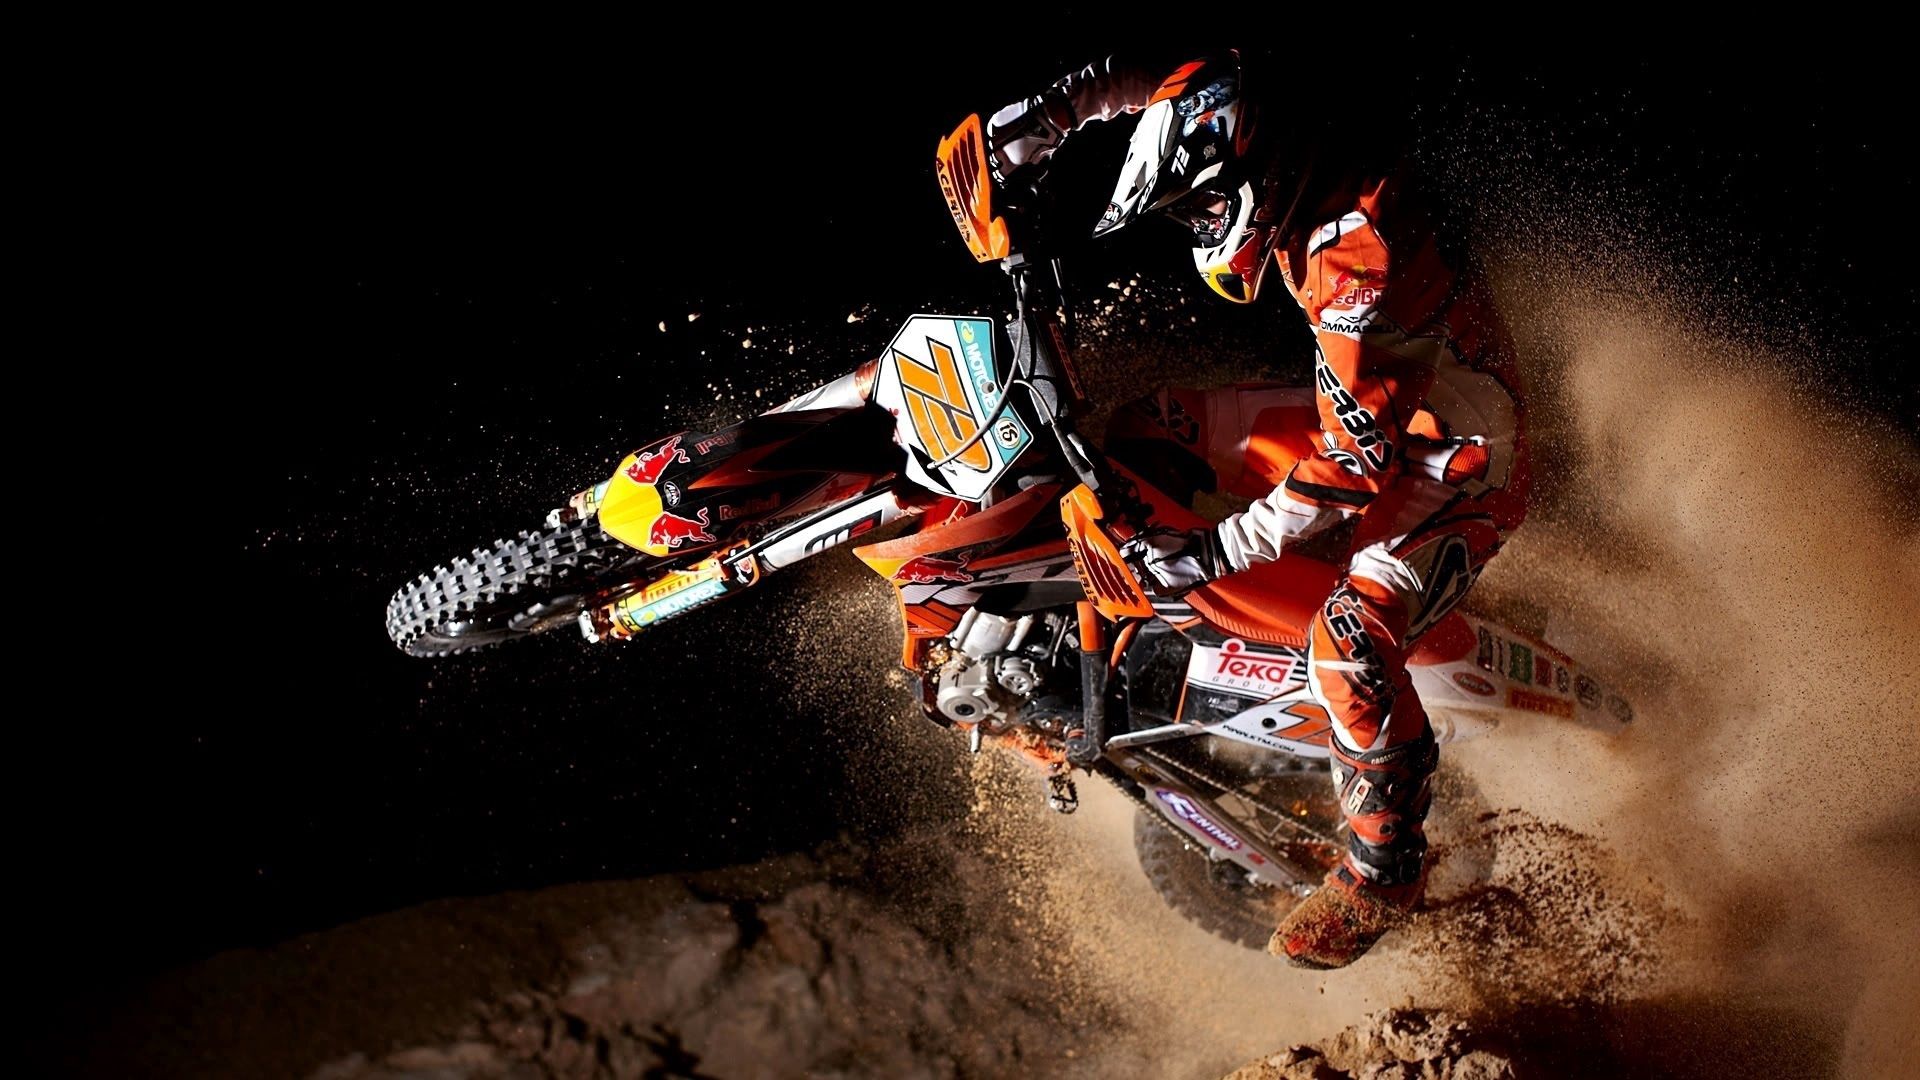 Full HD Wallpaper motorcycle, motorcycles, x fighters, x games